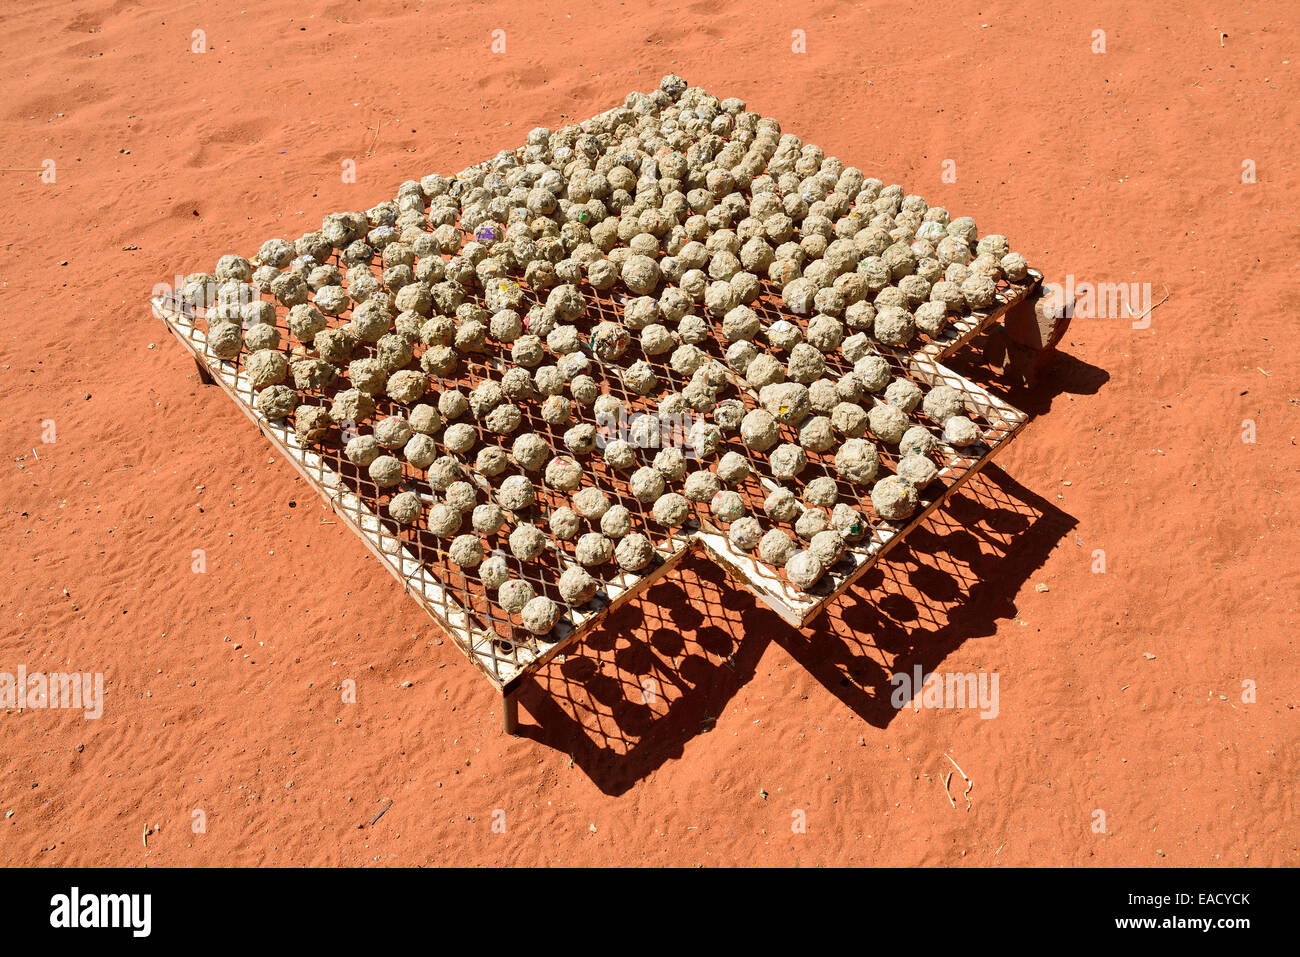 Renewable energy, balls of recycled paper, papier mache, paper mache, drying in the sun, Namibia Stock Photo